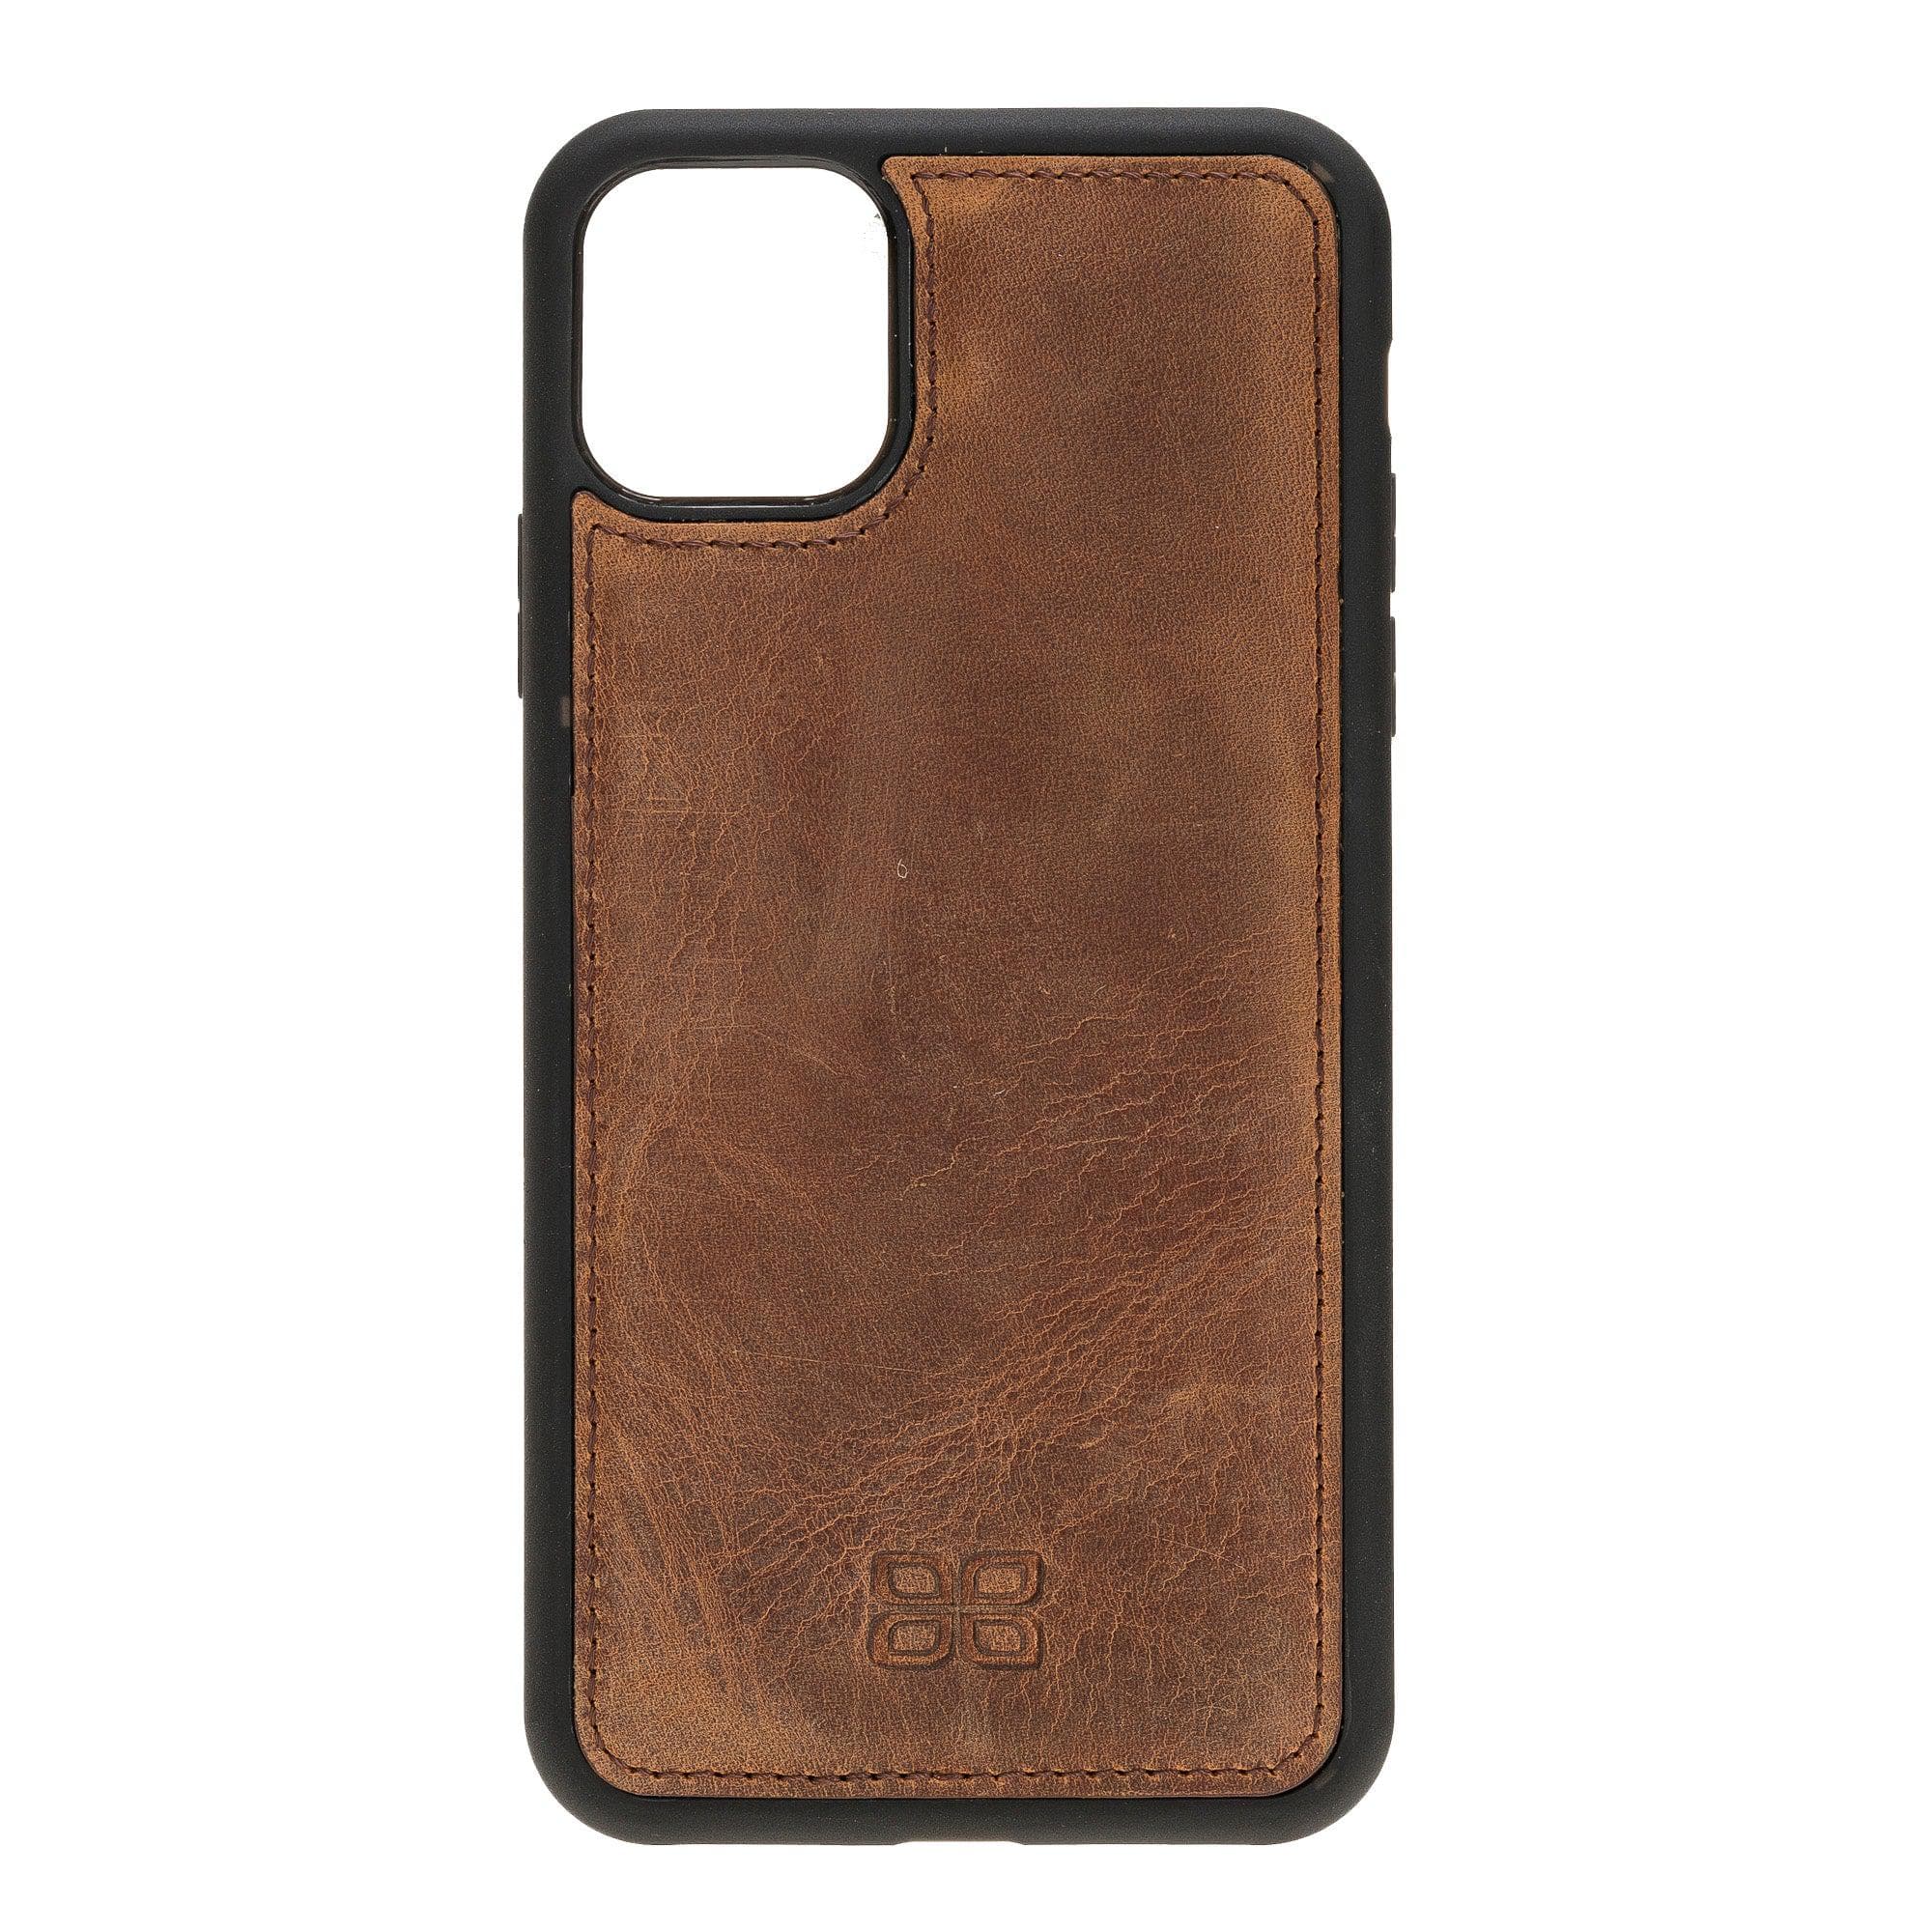 Flex Cover Leather Back Cover Case for Apple iPhone 11 Series iPhone 11 Promax 6.5" / Antic Brown Bouletta LTD